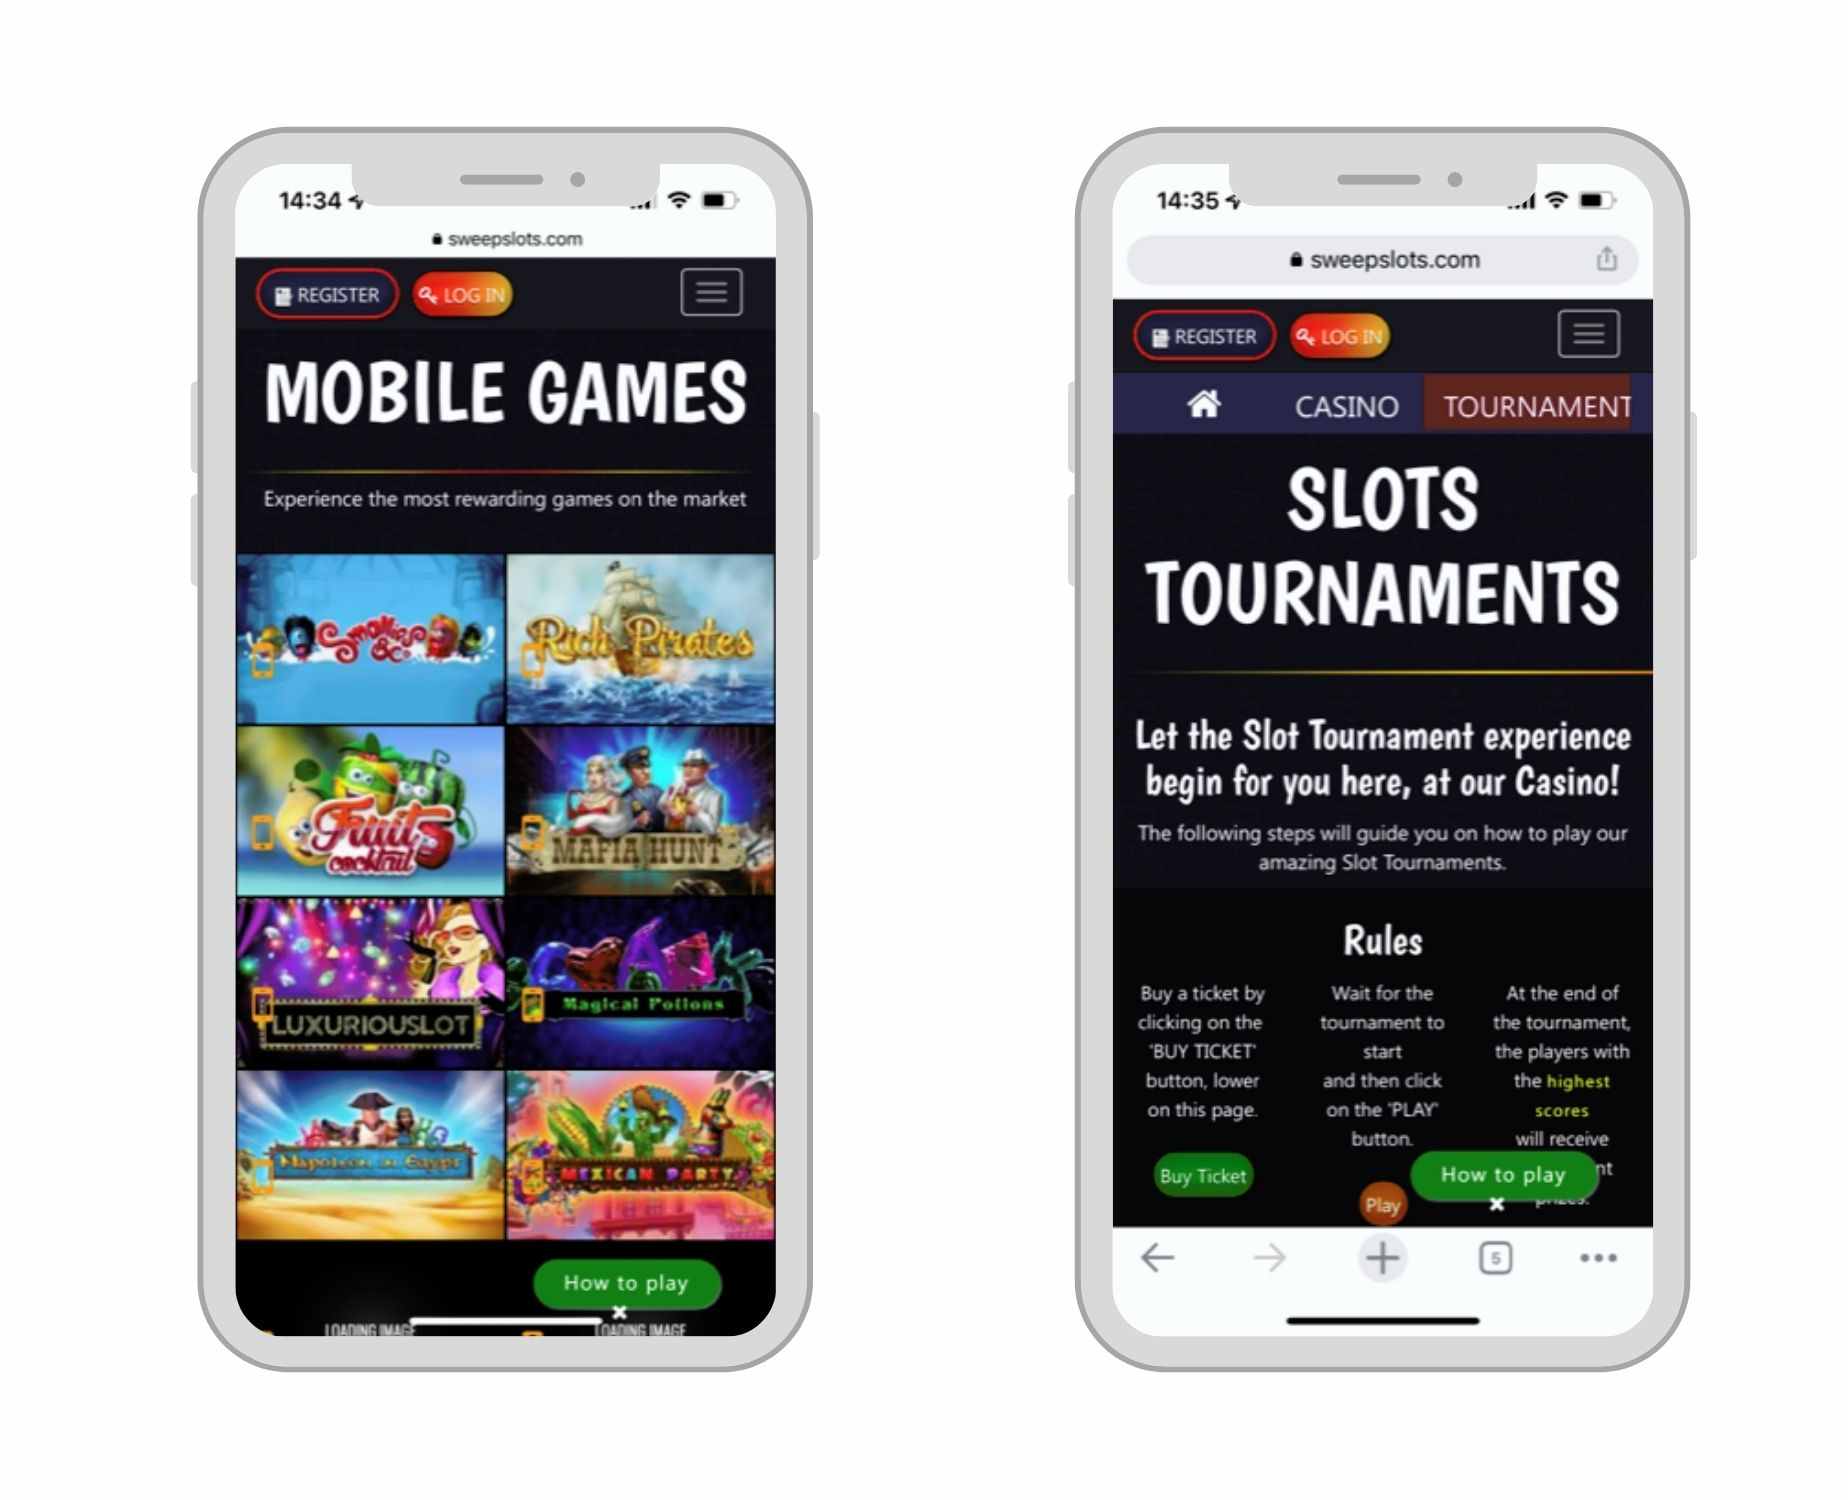 Mobile view of SweepSlots' slot tournaments and mobile games pages